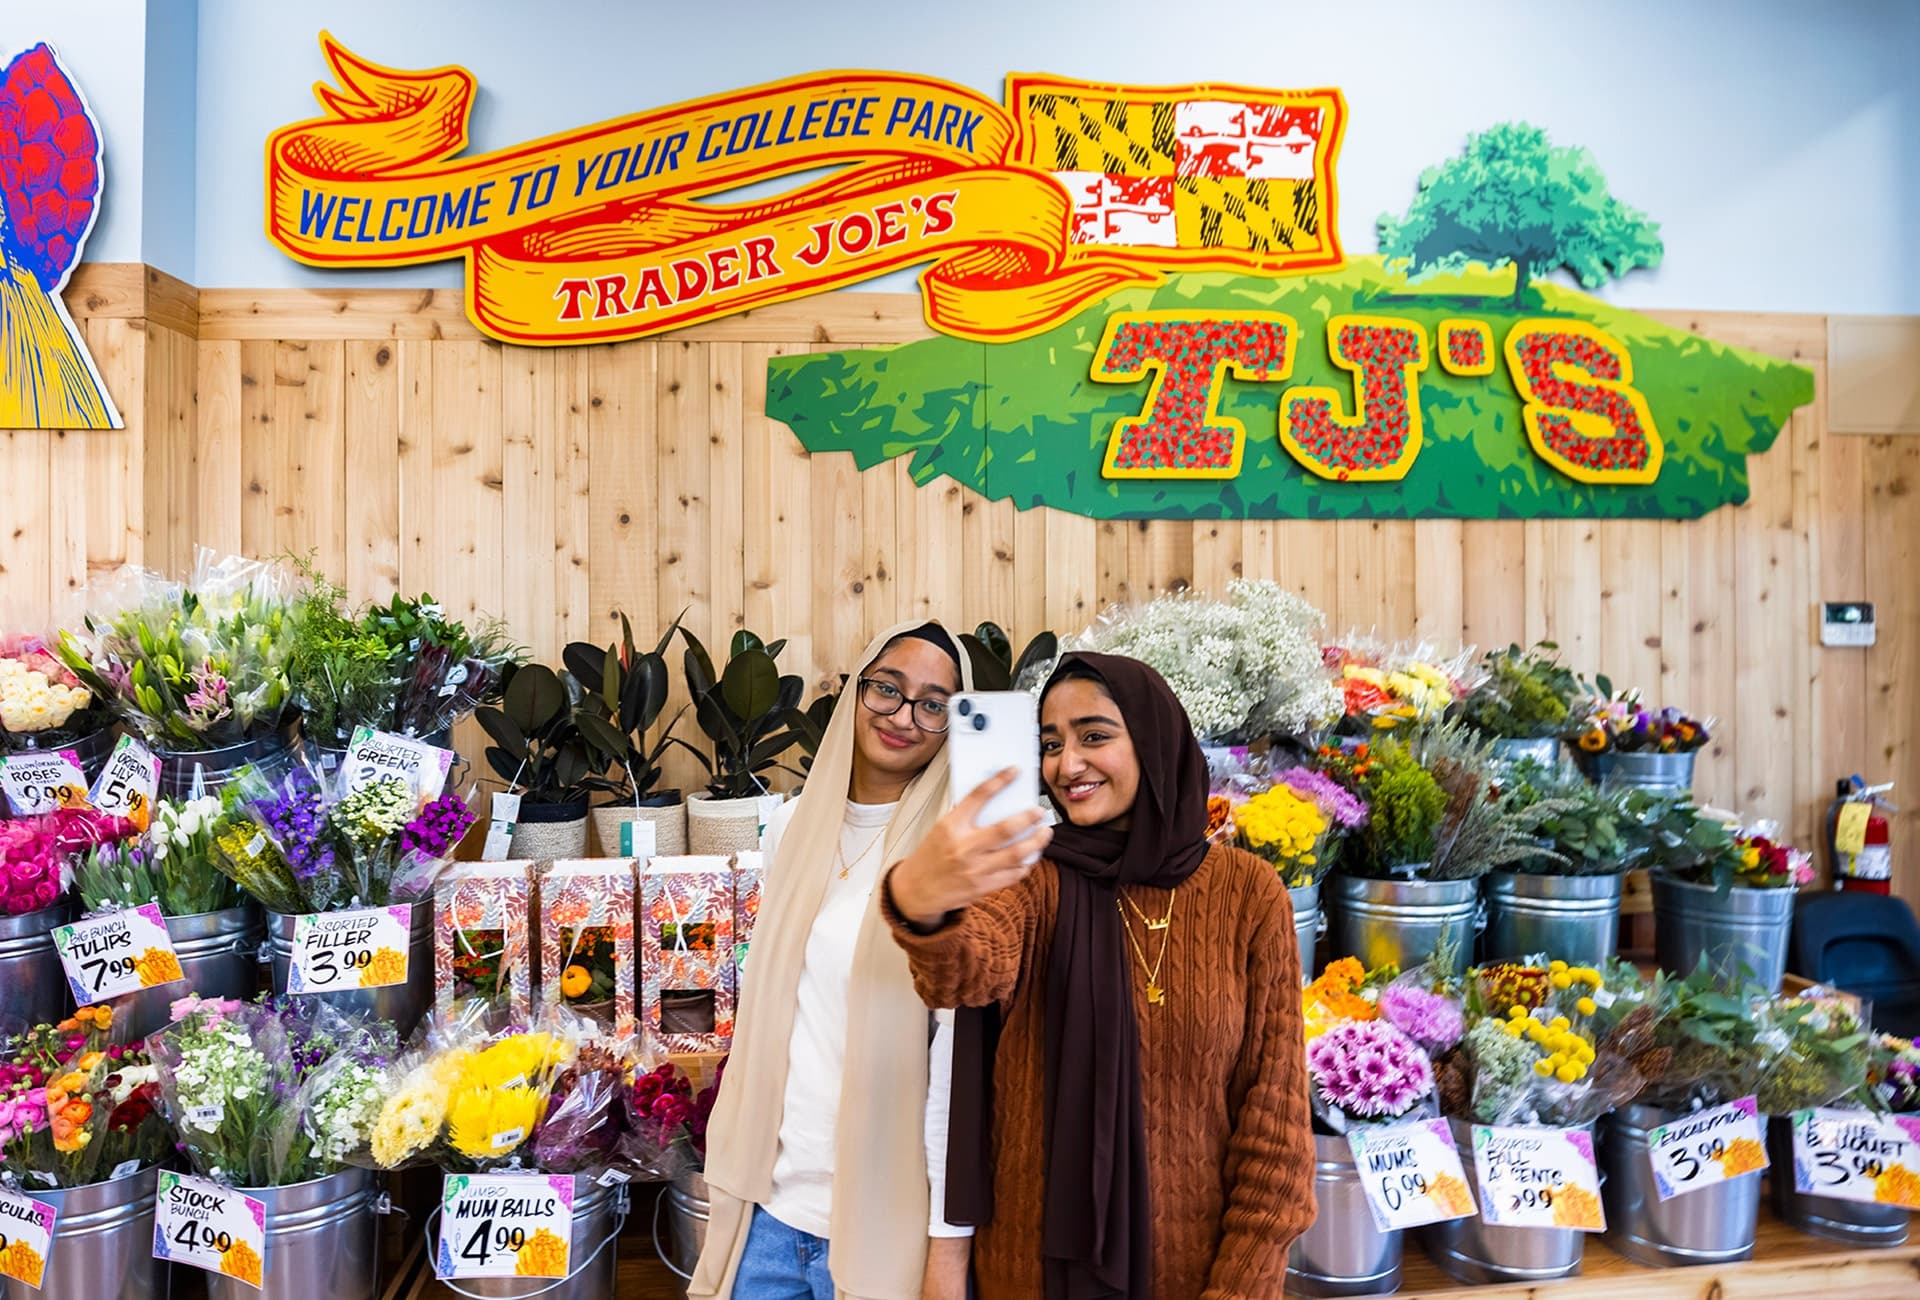 students take a selfie in the College Park Trader Joe's